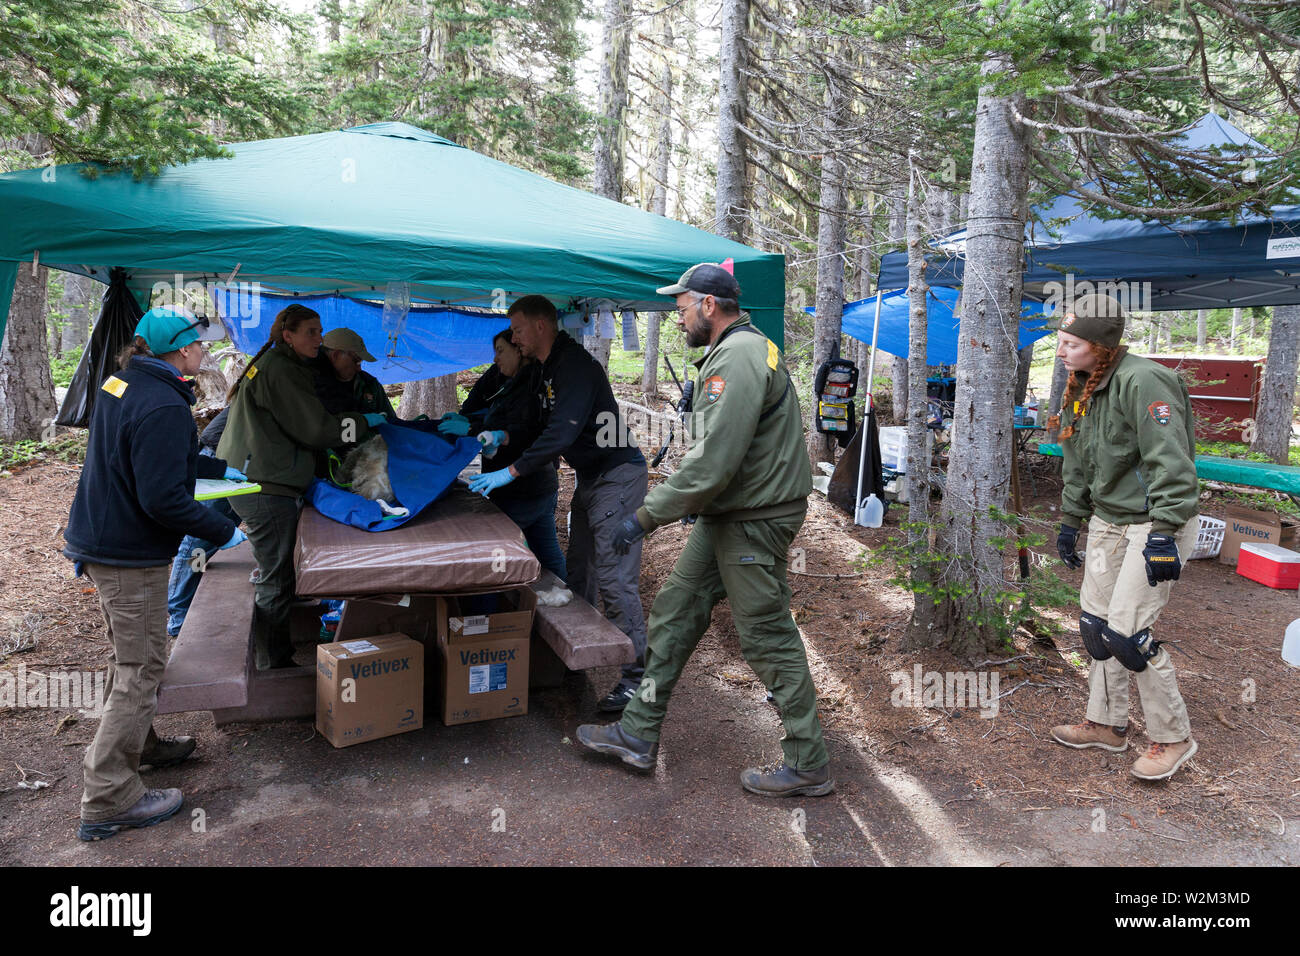 A team of rangers, employees and volunteers prepare to move a tranquilized mountain goat at Hurricane Ridge in Olympic National Park, Washington on July 9, 2019. Today is the second day of a two-week long capture and translocation process moving mountain goats from Olympic National Park to the northern Cascade Mountains. The effort is a collaboration between the National Park Service, the Washington Department of Fish & Wildlife and the USDA Forest Service to re-establish depleted populations of mountain goats in the Northern Cascades while also removing non-native goats from the Olympic Mount Stock Photo